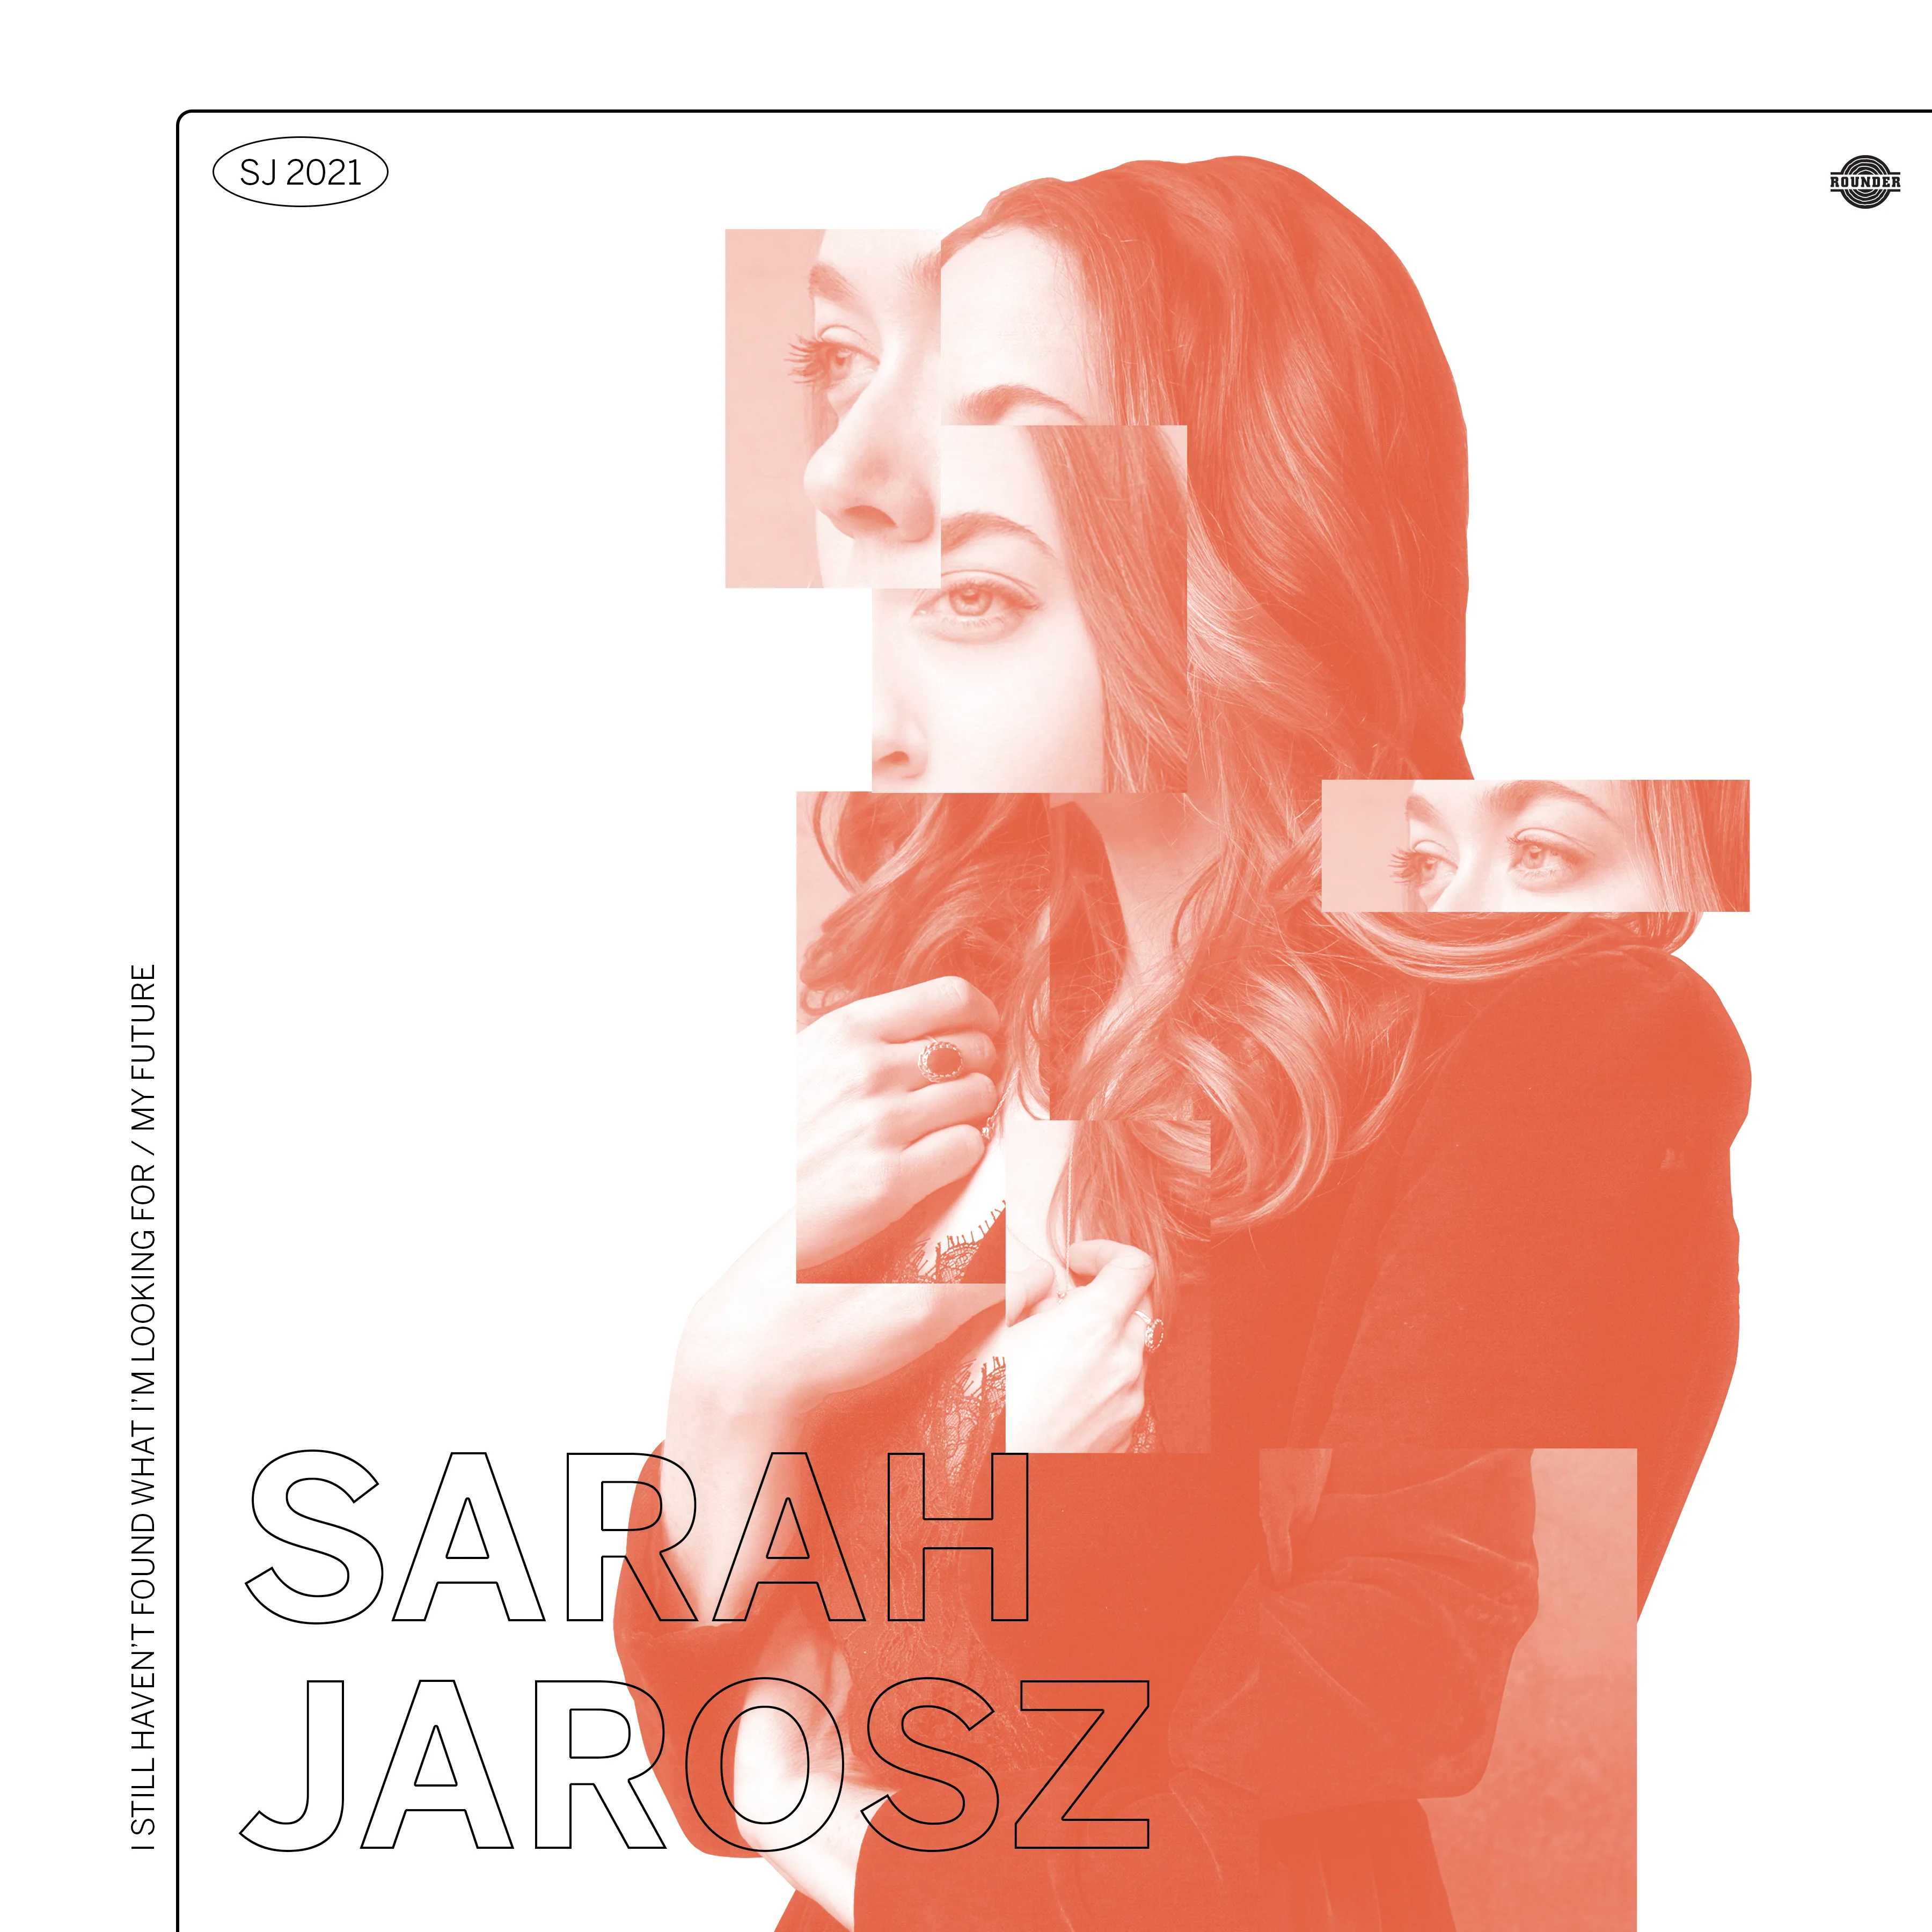 Sarah Jarosz - I Still Haven't Found What I'm Looking For/my future [RSD Drops 2021]